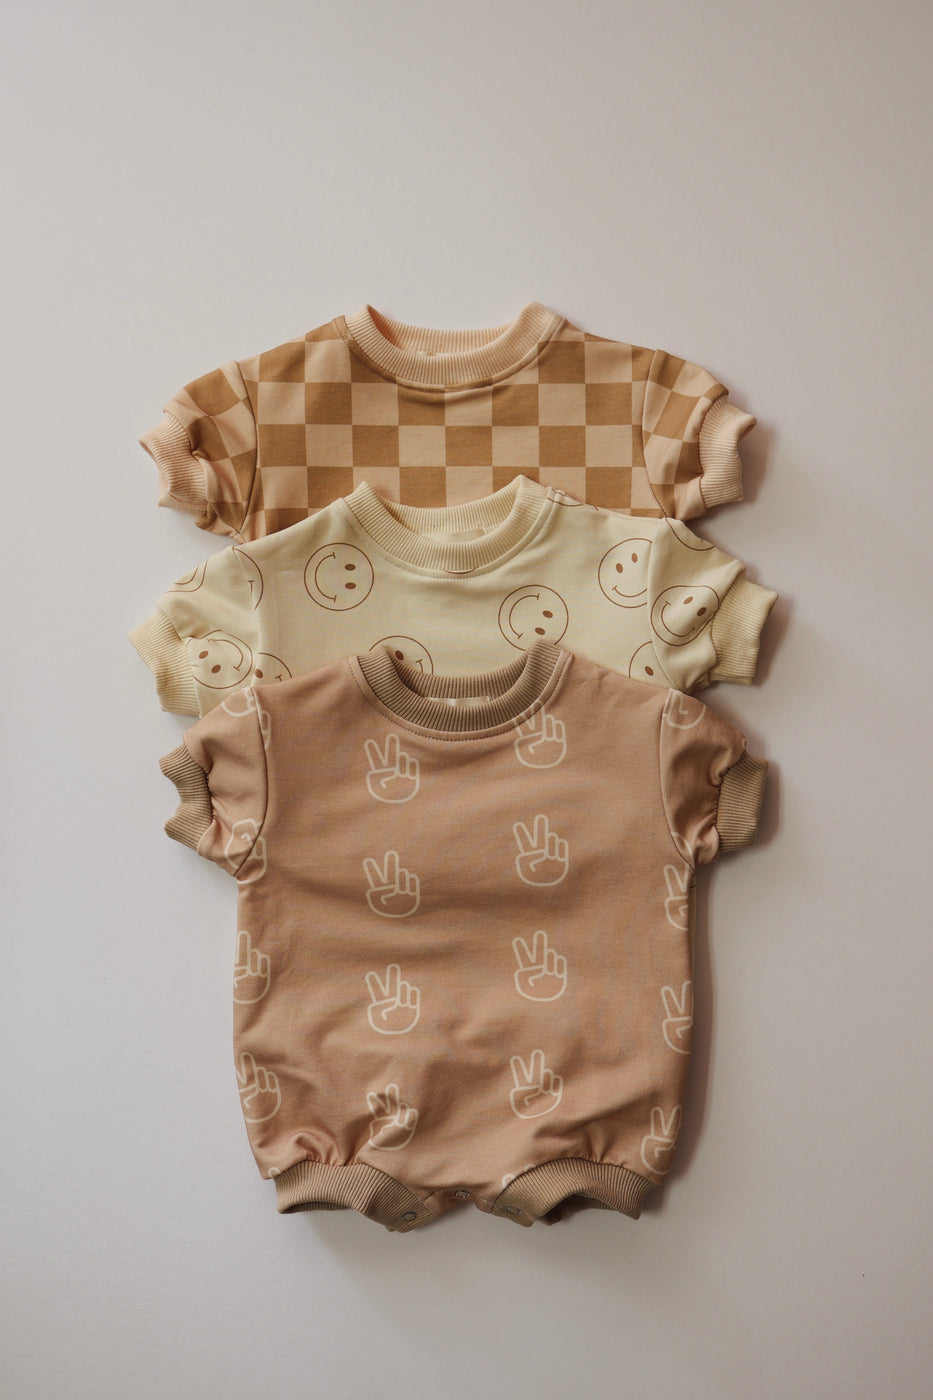 a group of baby clothes